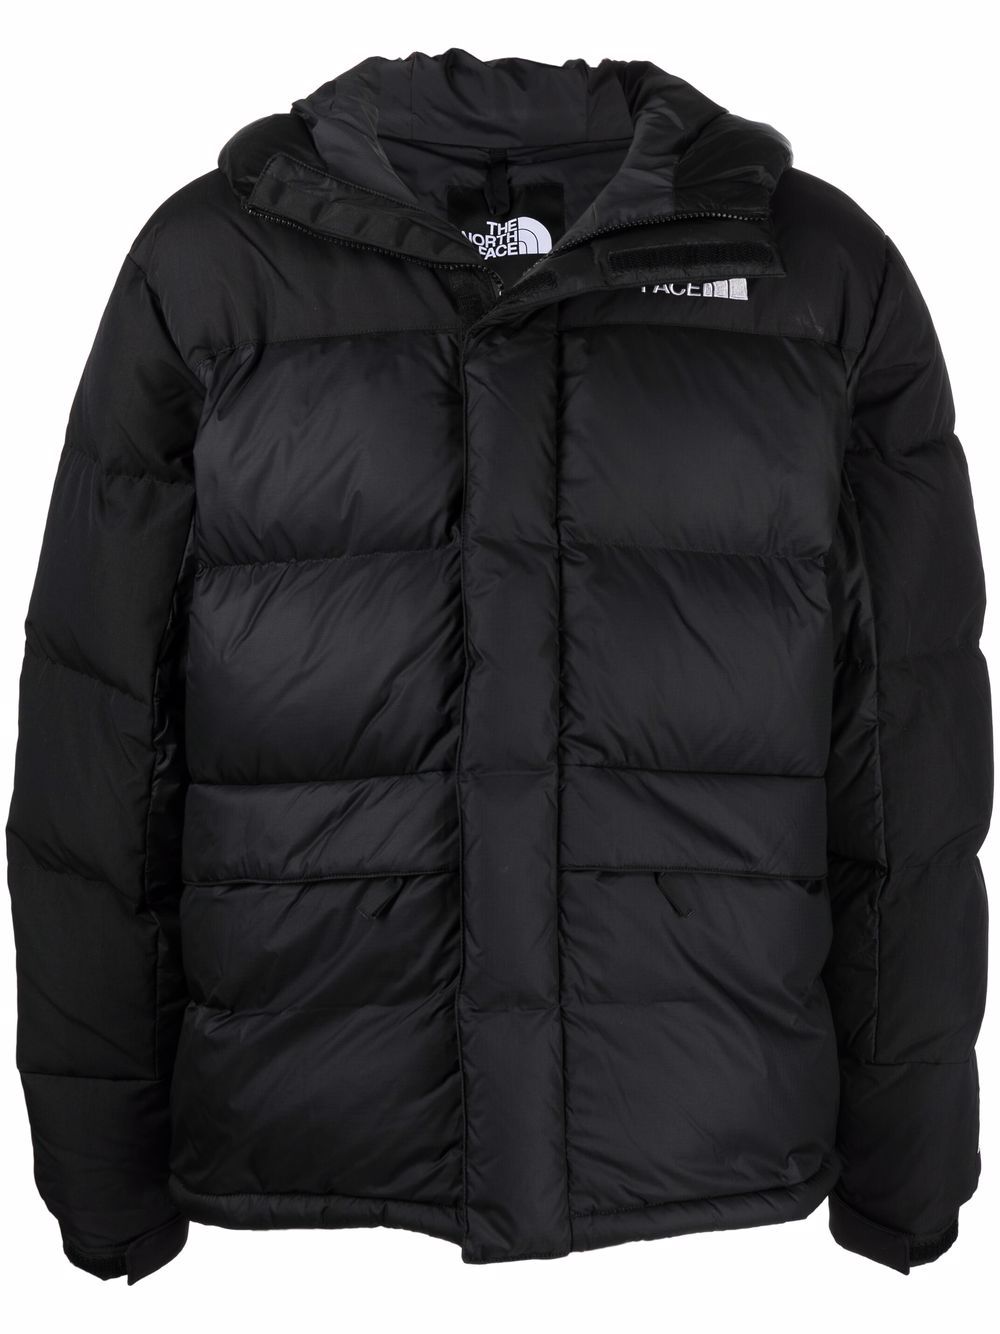 Image 1 of The North Face padded parka jacket